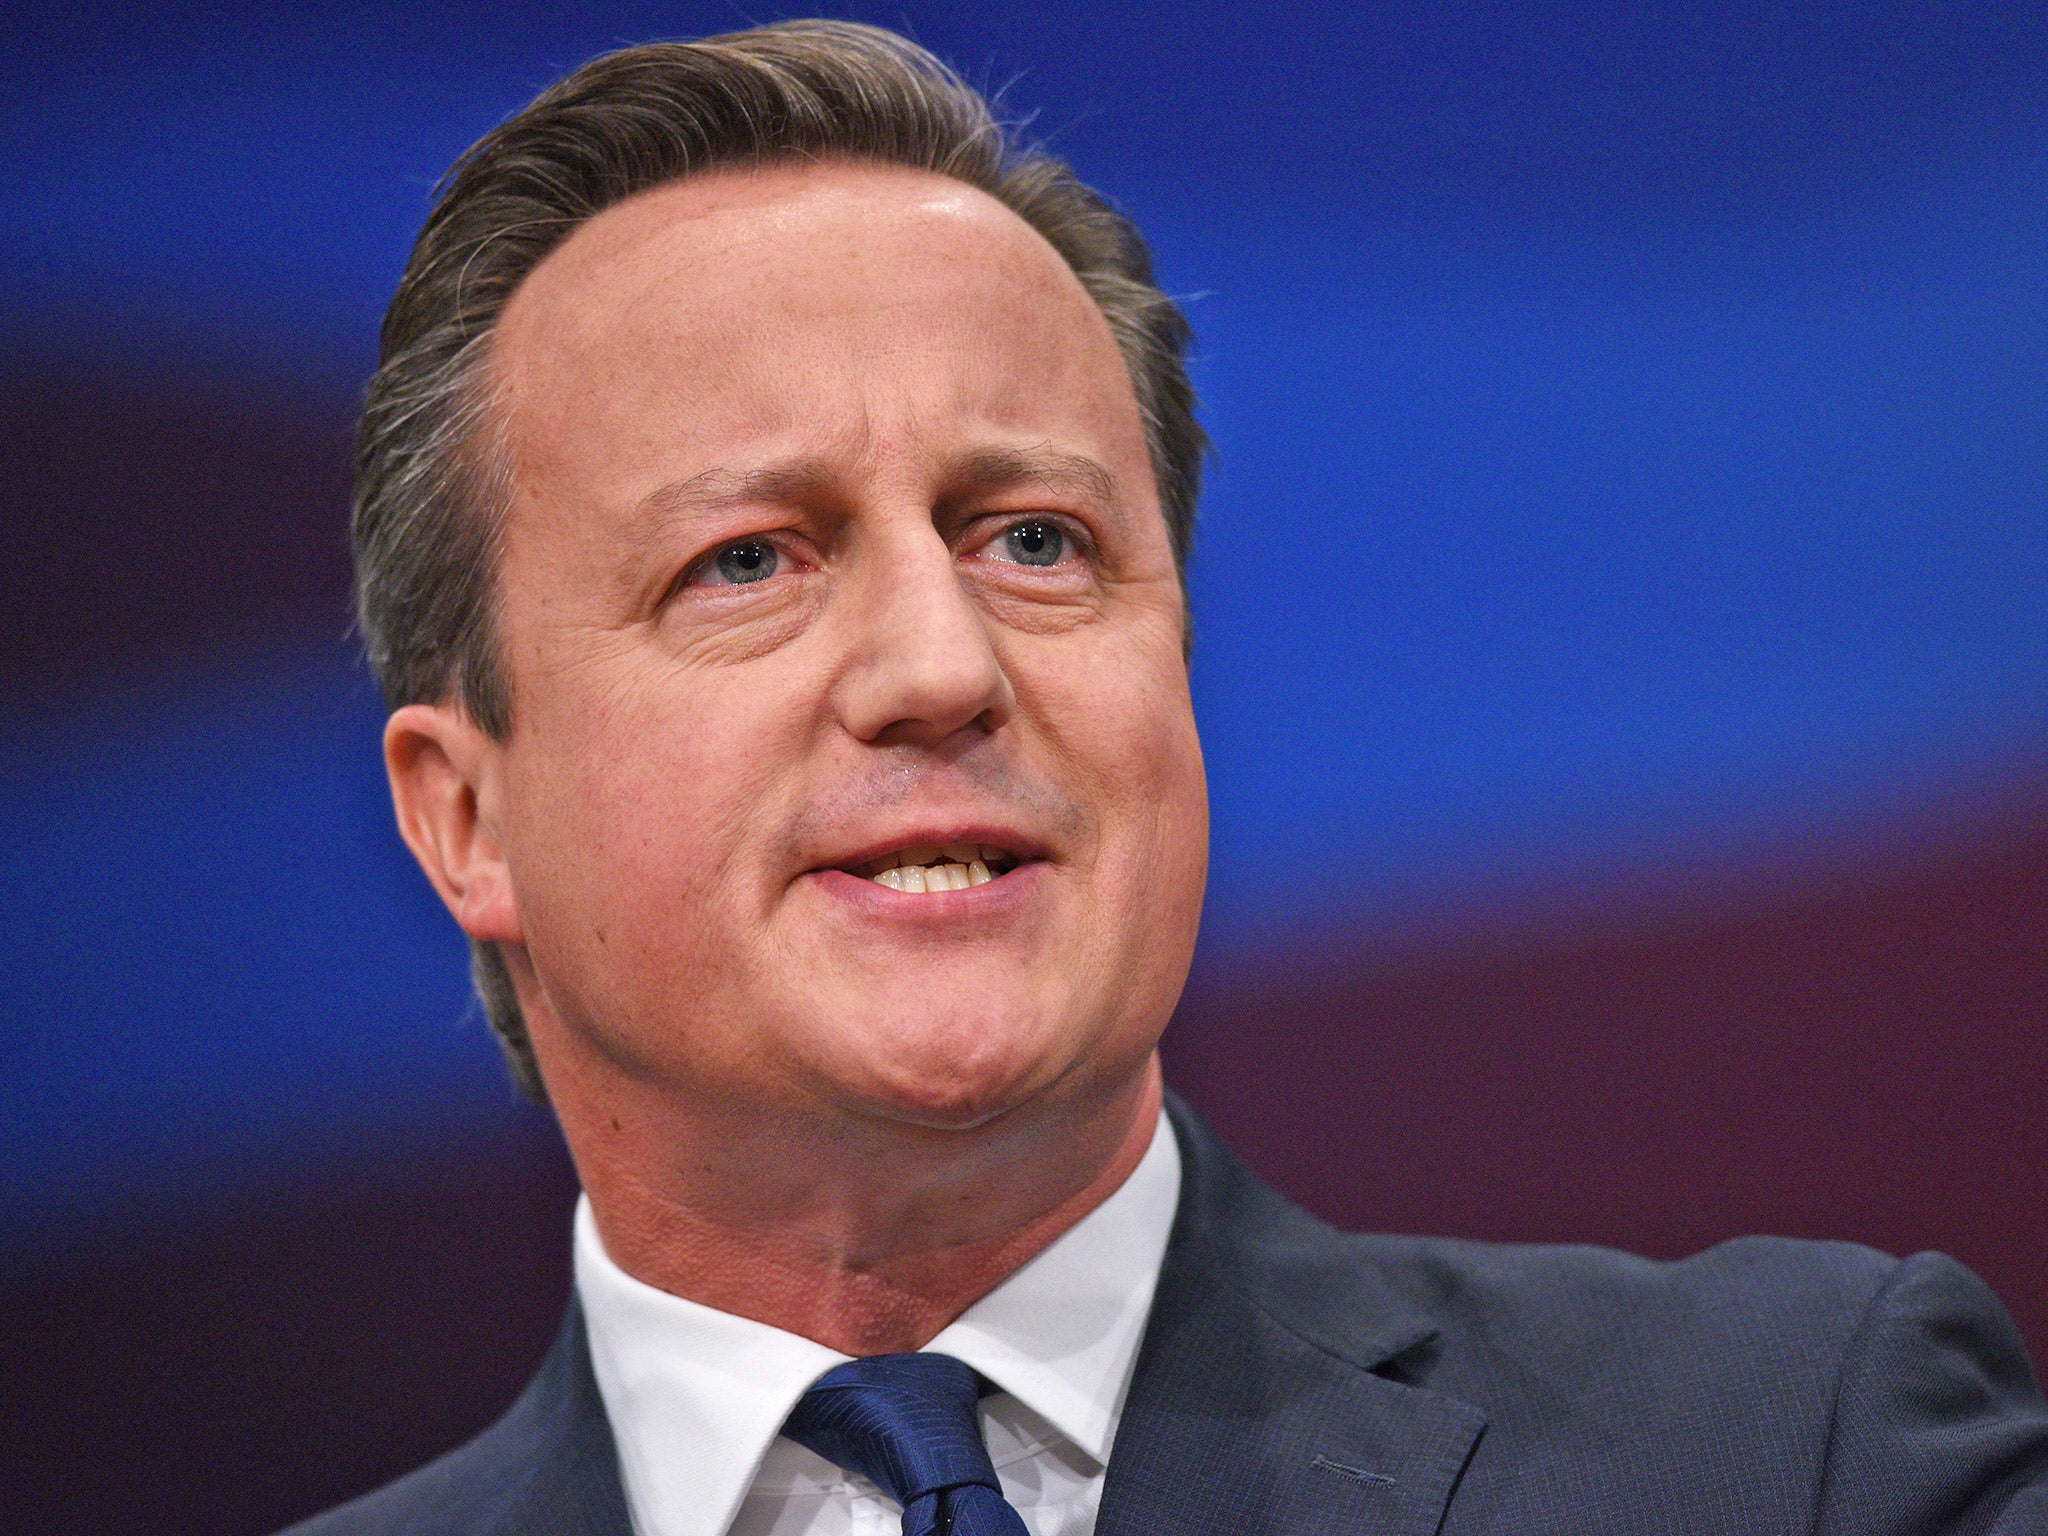 David Cameron might have to wait until early next year before beginning negotiations in earnest